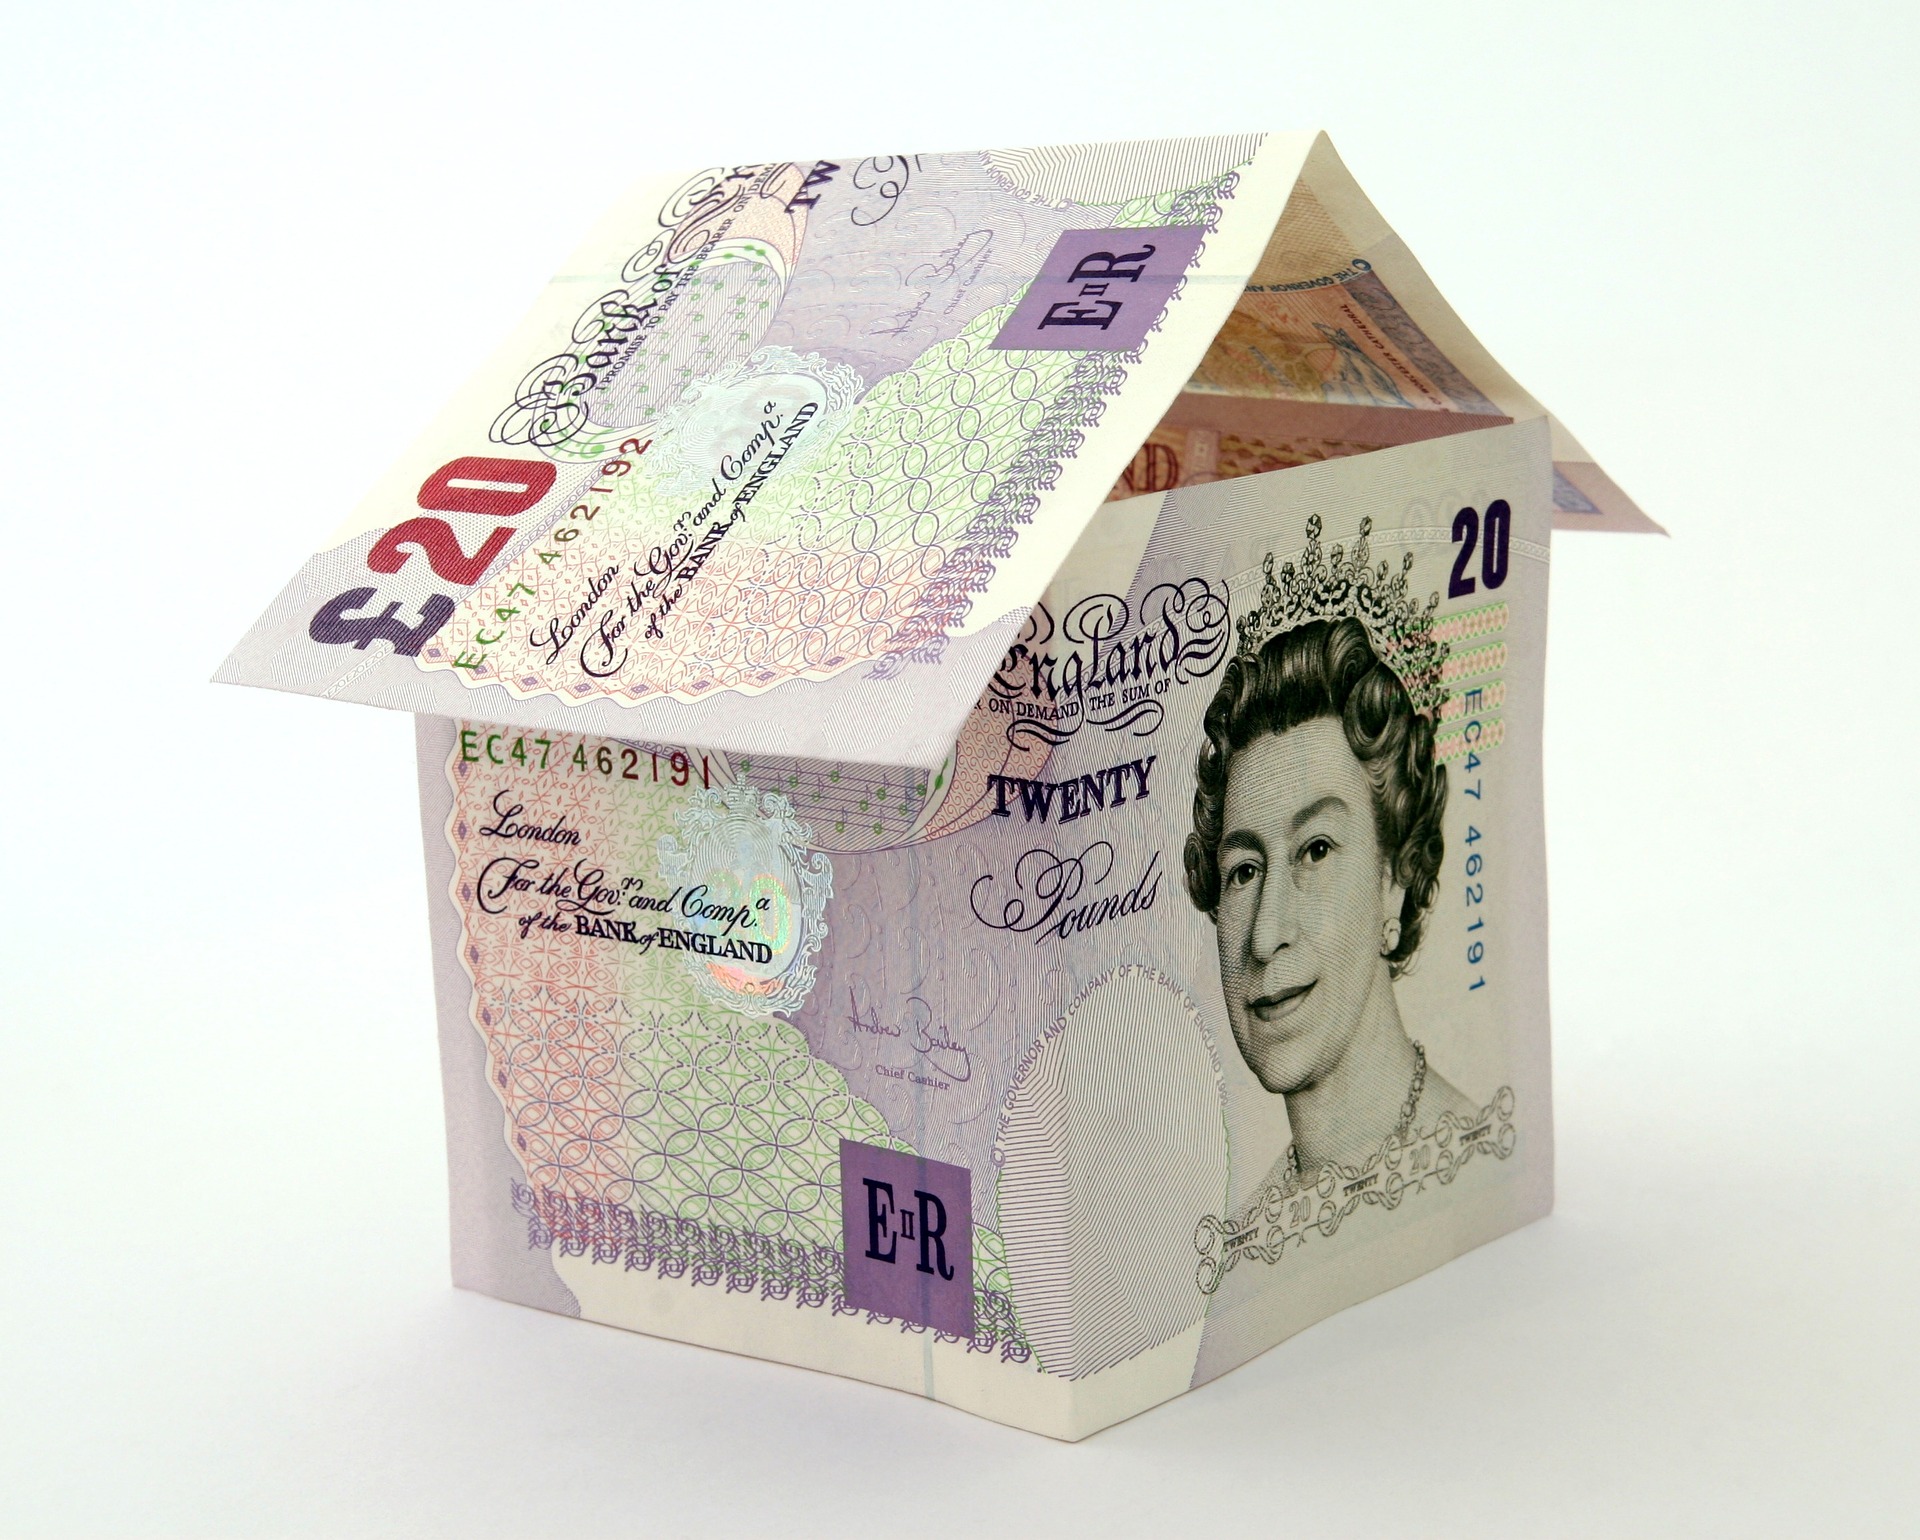 House price growth slows in April but remains in double digits – Nationwide